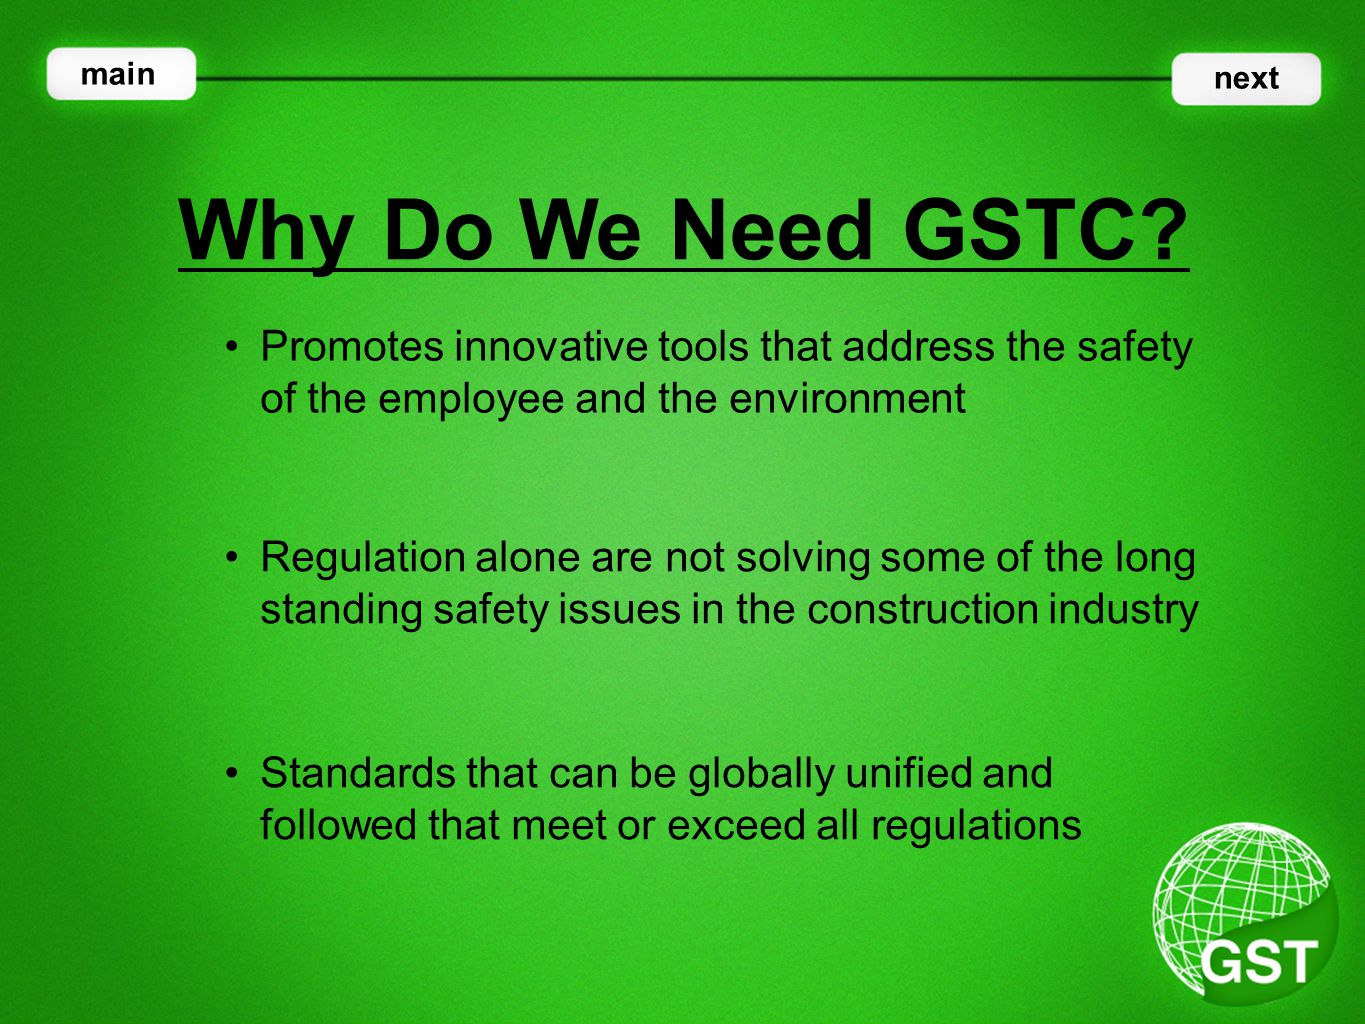 Promotes innovative tools that address the safety of the employee and the environment Why Do We Need GSTC.